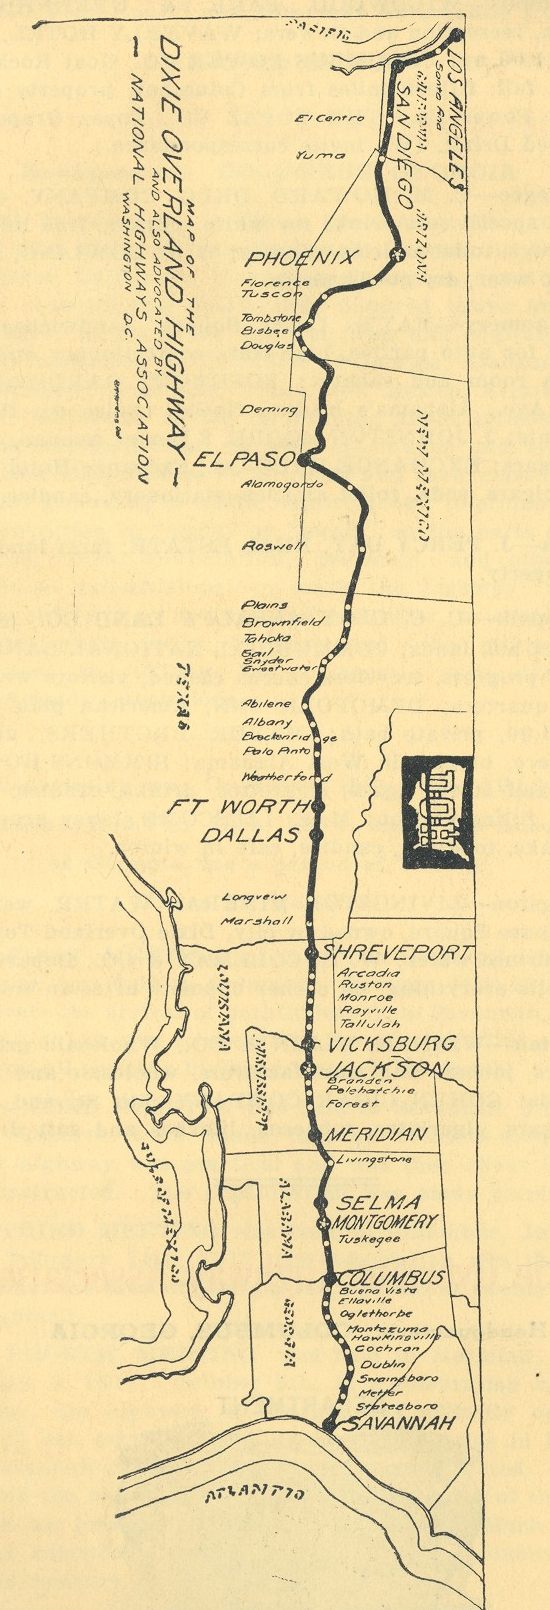 Map showing county seats on the Dixie Overland Highway. From the Dixie Overland Highway Association